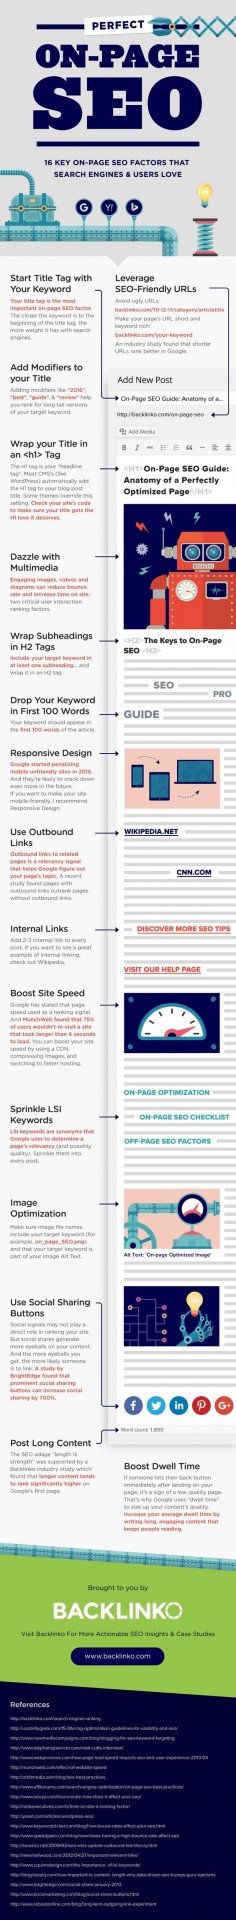 16 Key On-Page SEO Factors That Search Engines And Users Love [Infographic] | Social Media Today